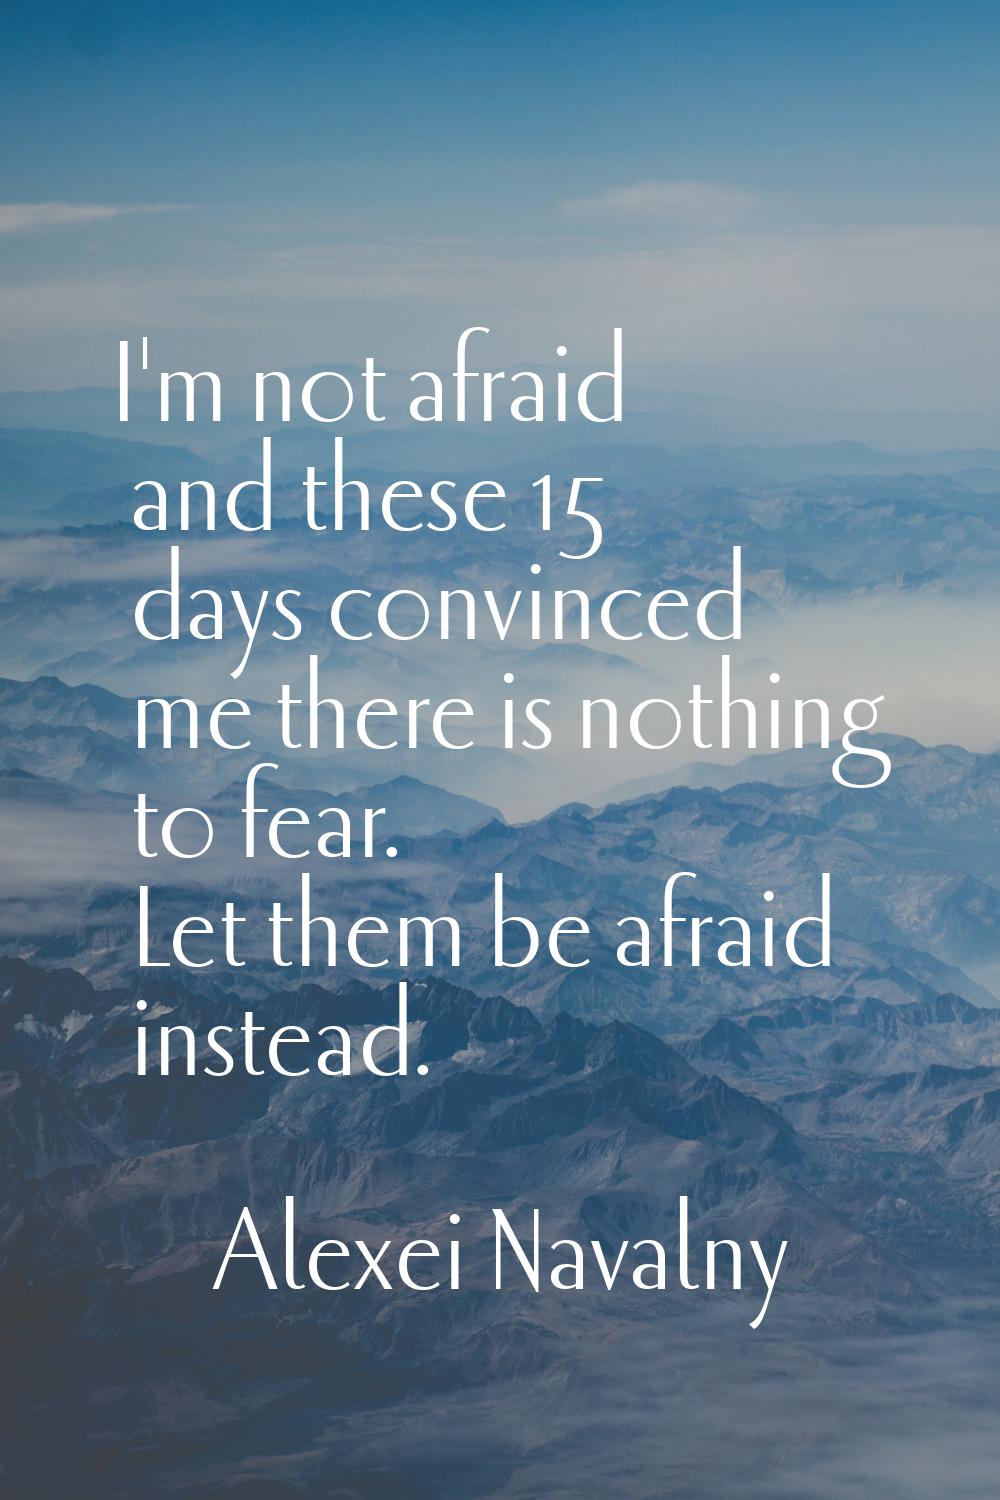 I'm not afraid and these 15 days convinced me there is nothing to fear. Let them be afraid instead.